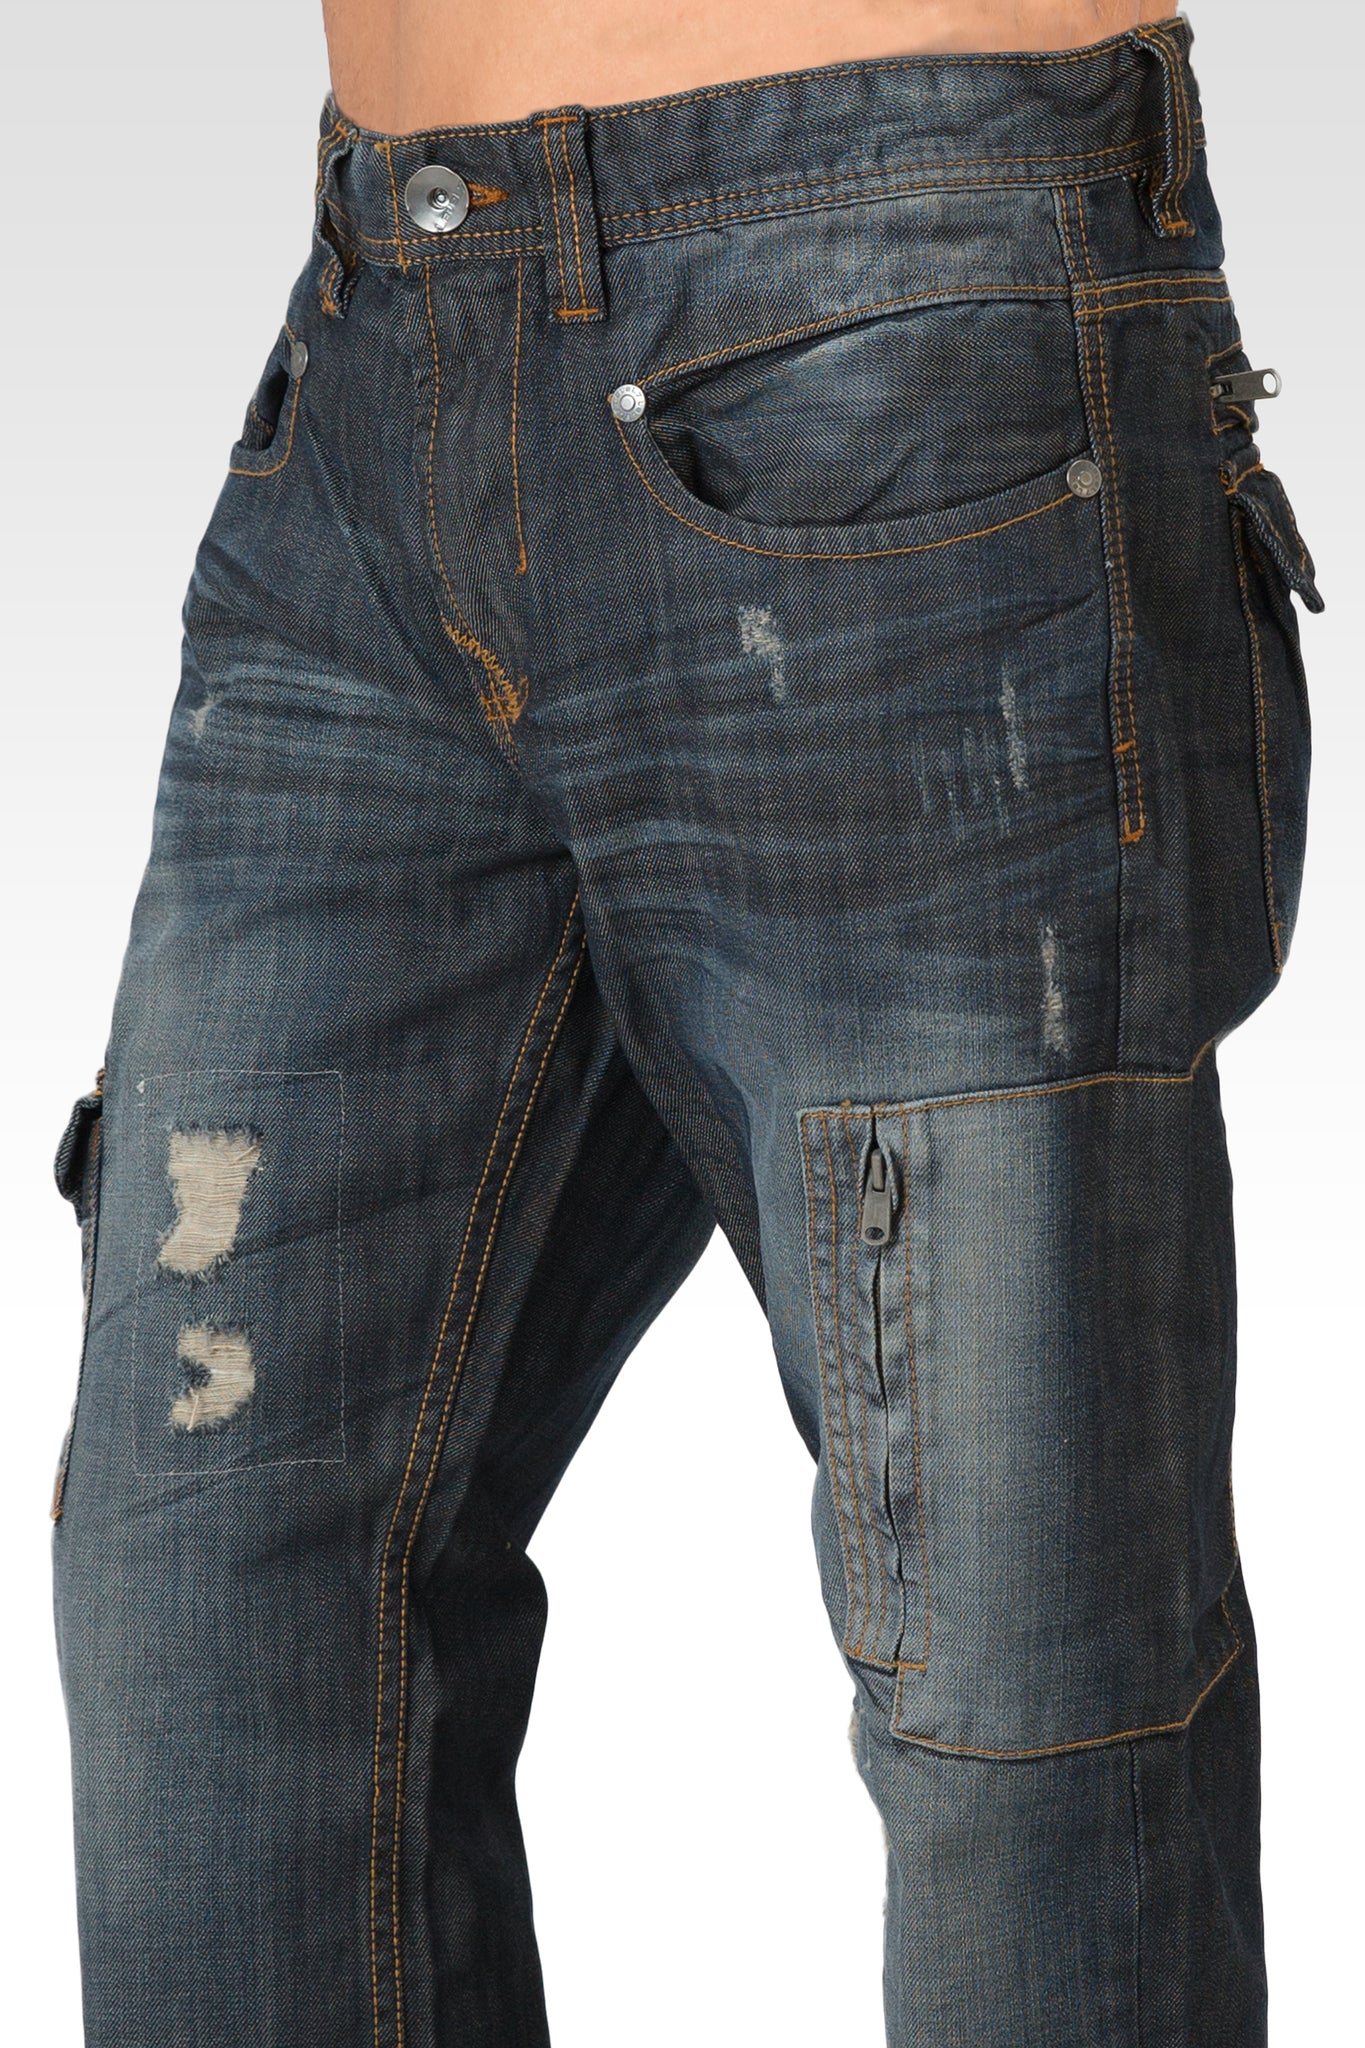 Men's Midrise Relaxed Fit Premium Denim Jeans with Utility Pockets